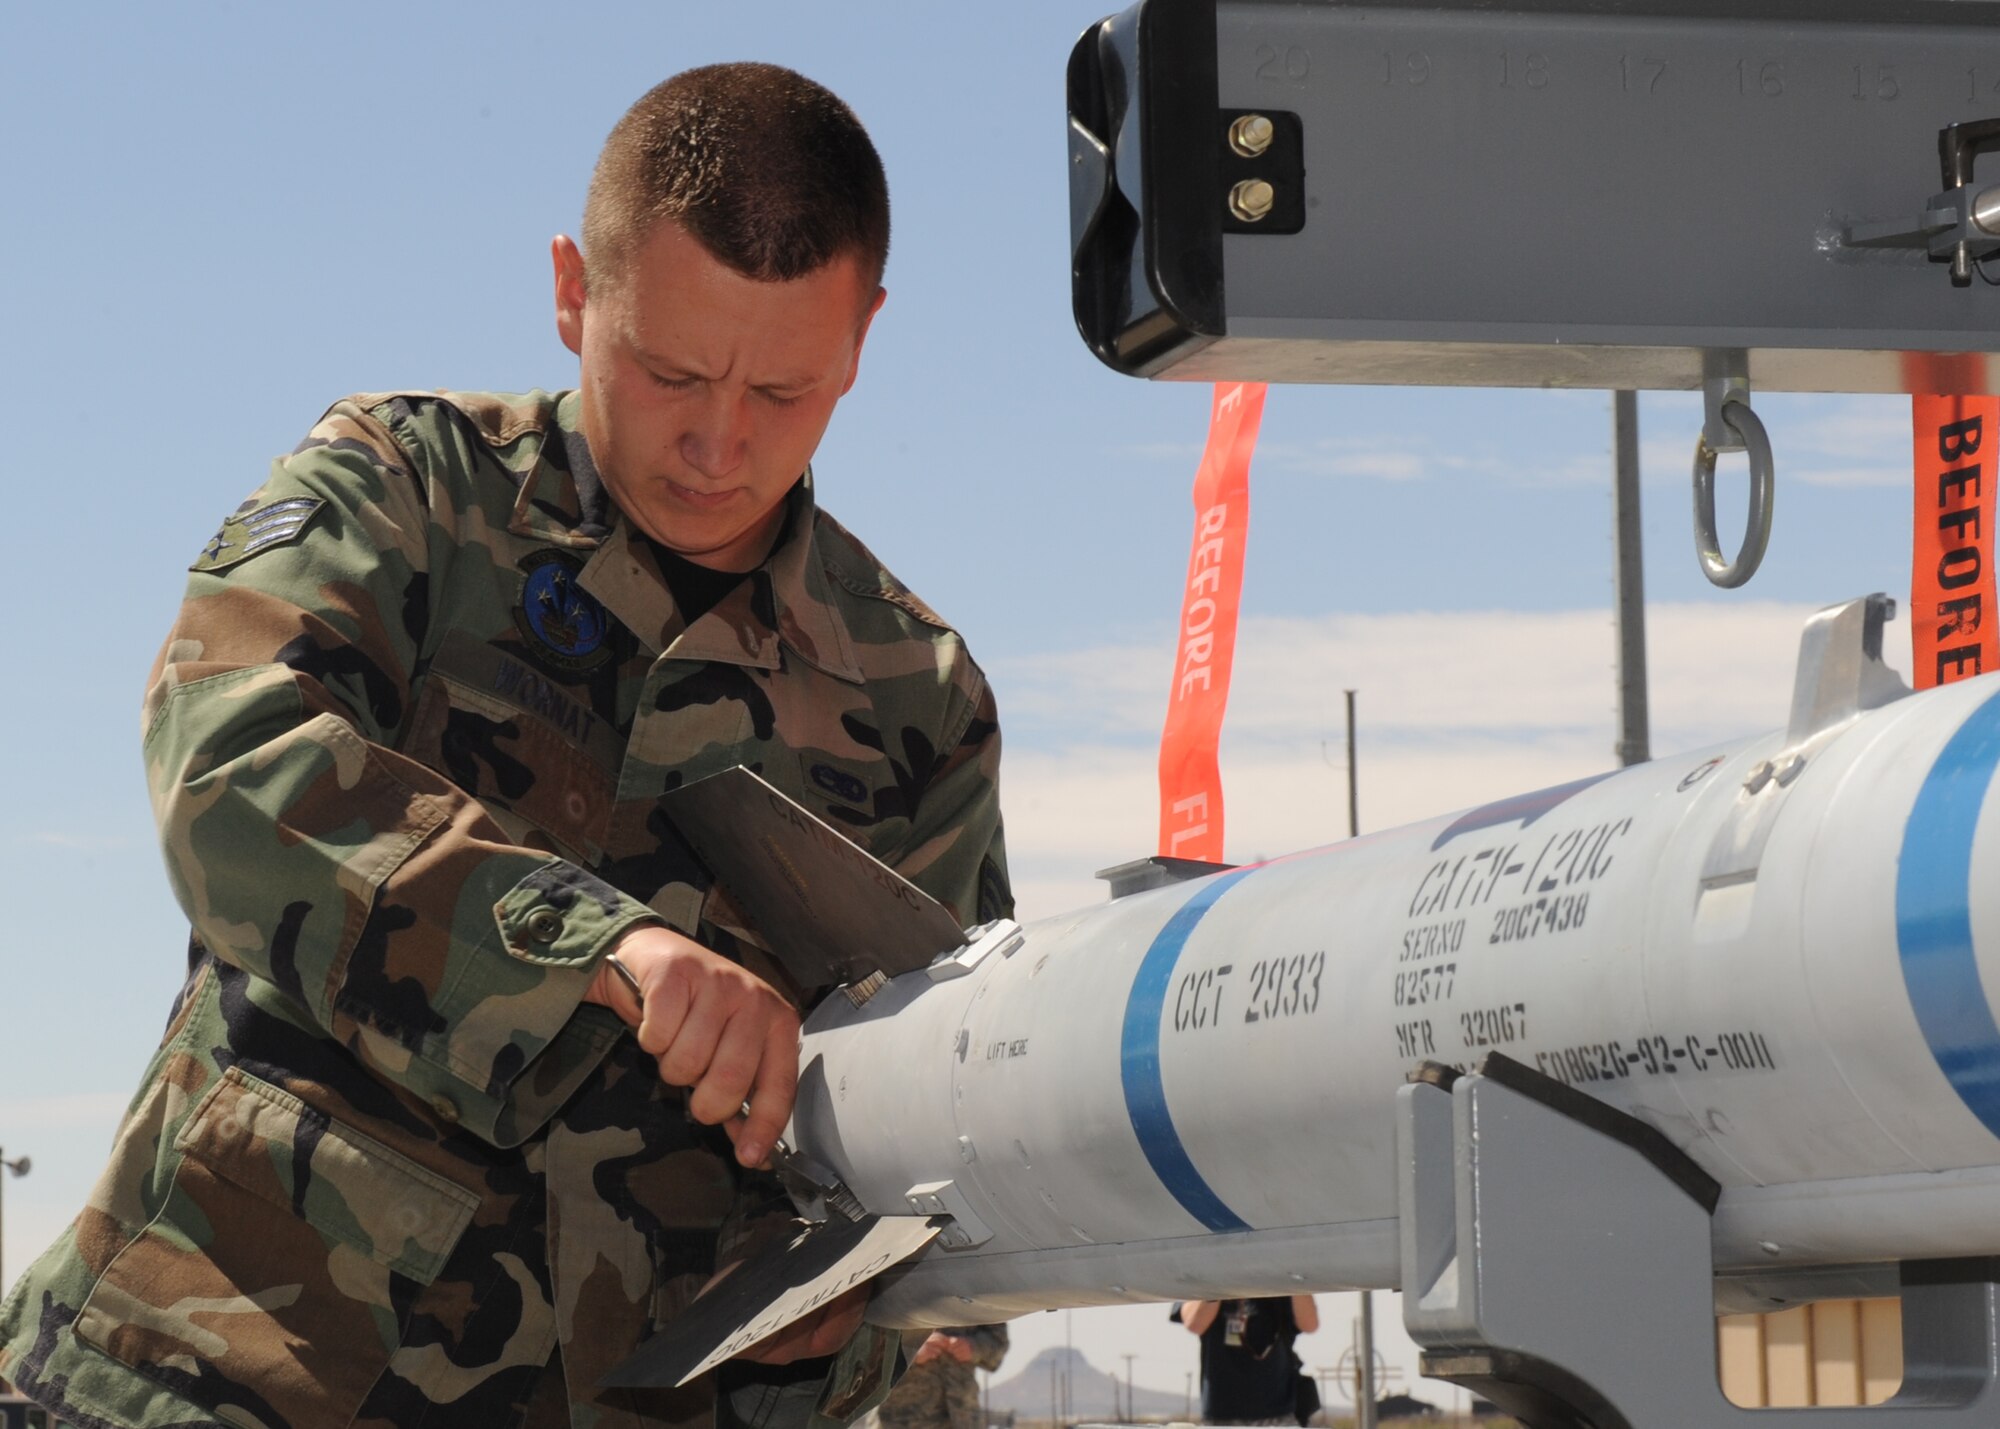 Senior Airman Ray Wornat, 49th Aircraft Maintenance Squadron, inspects an AIM-9 Sidewinder during the 49th Maintenance Group, Quarterly Load Crew competition, April 10, at Holloman Air Force Base, N.M. Squadron finalists are judged on their accuracy, efficiency, and speed. (U.S. Air Force photo/Senior Airman Michael Means)